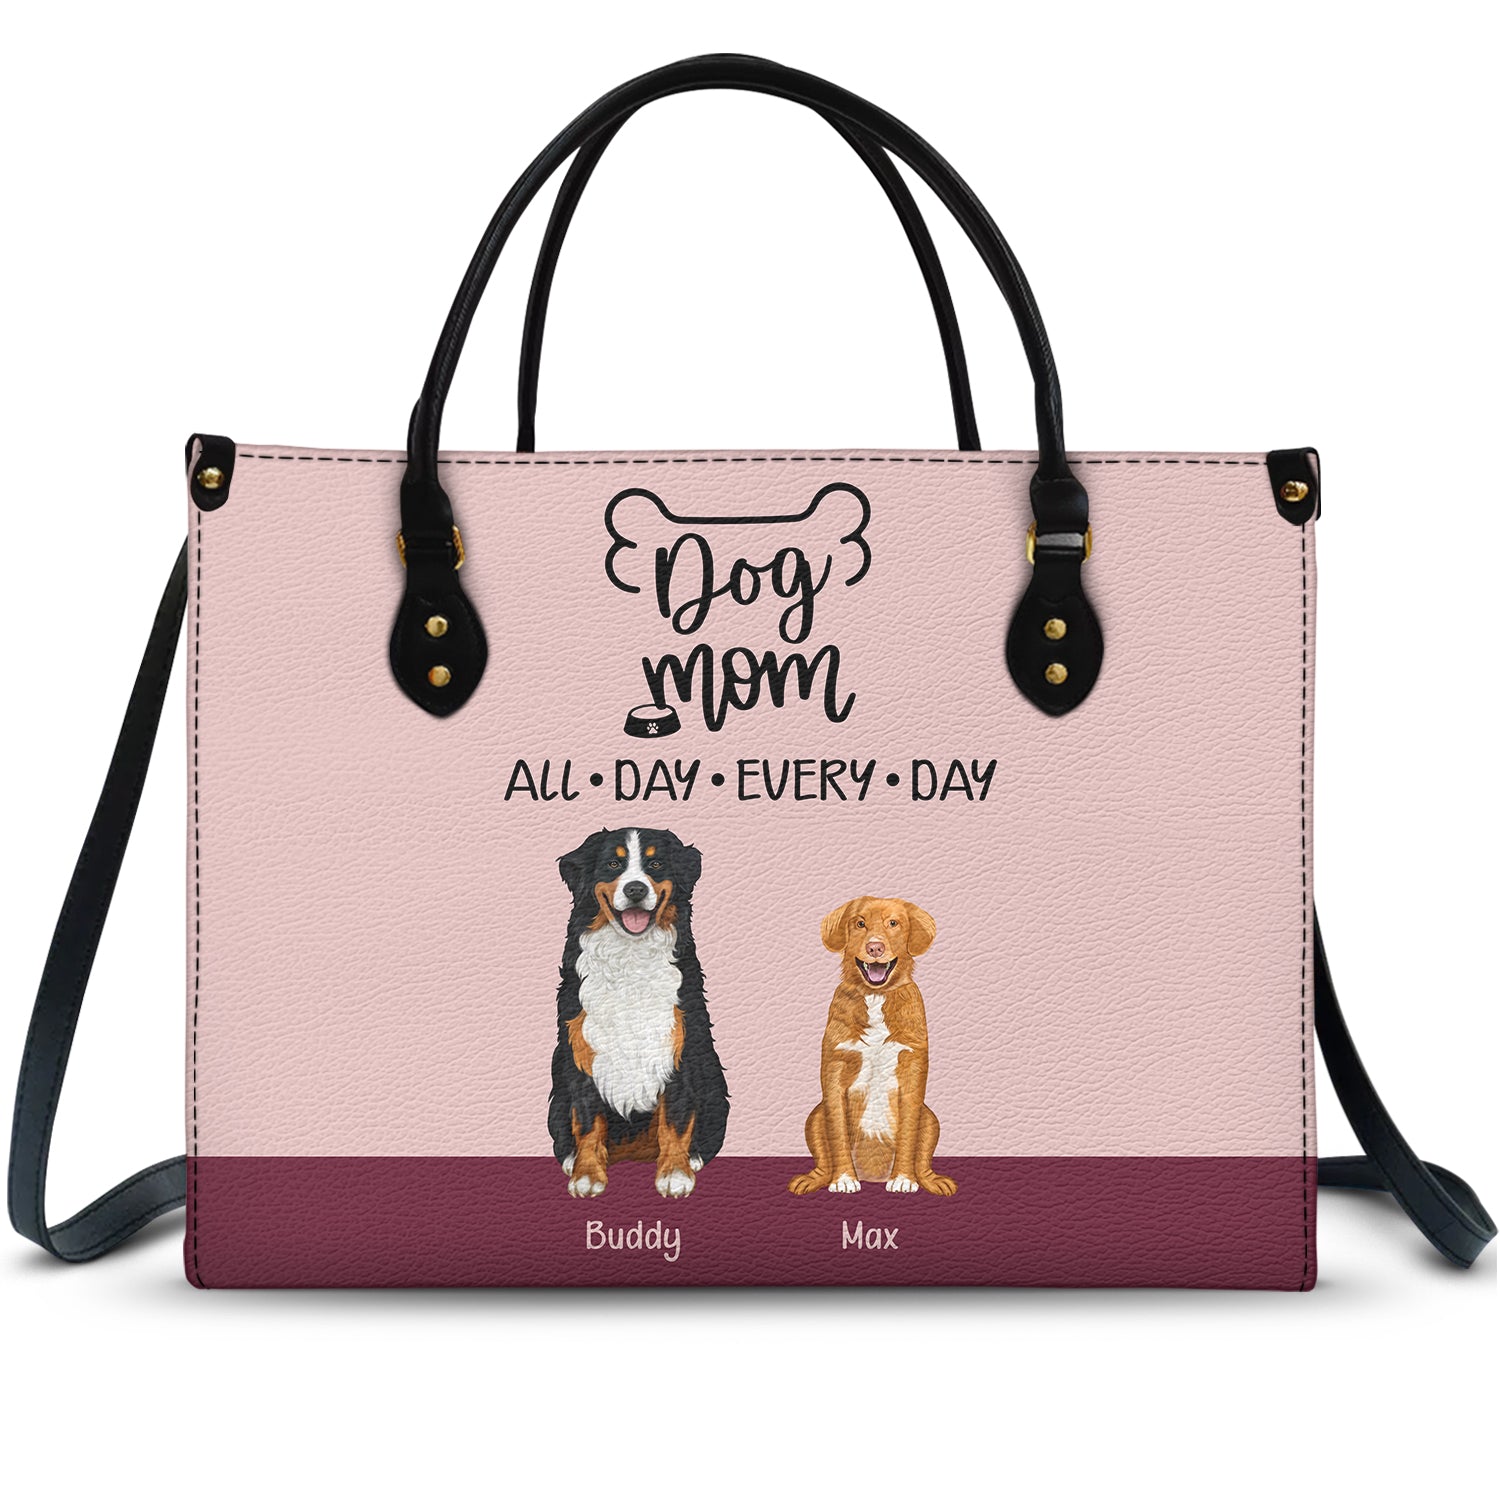 All Day Every Day - Gift For Dog Mom - Personalized Leather Bag